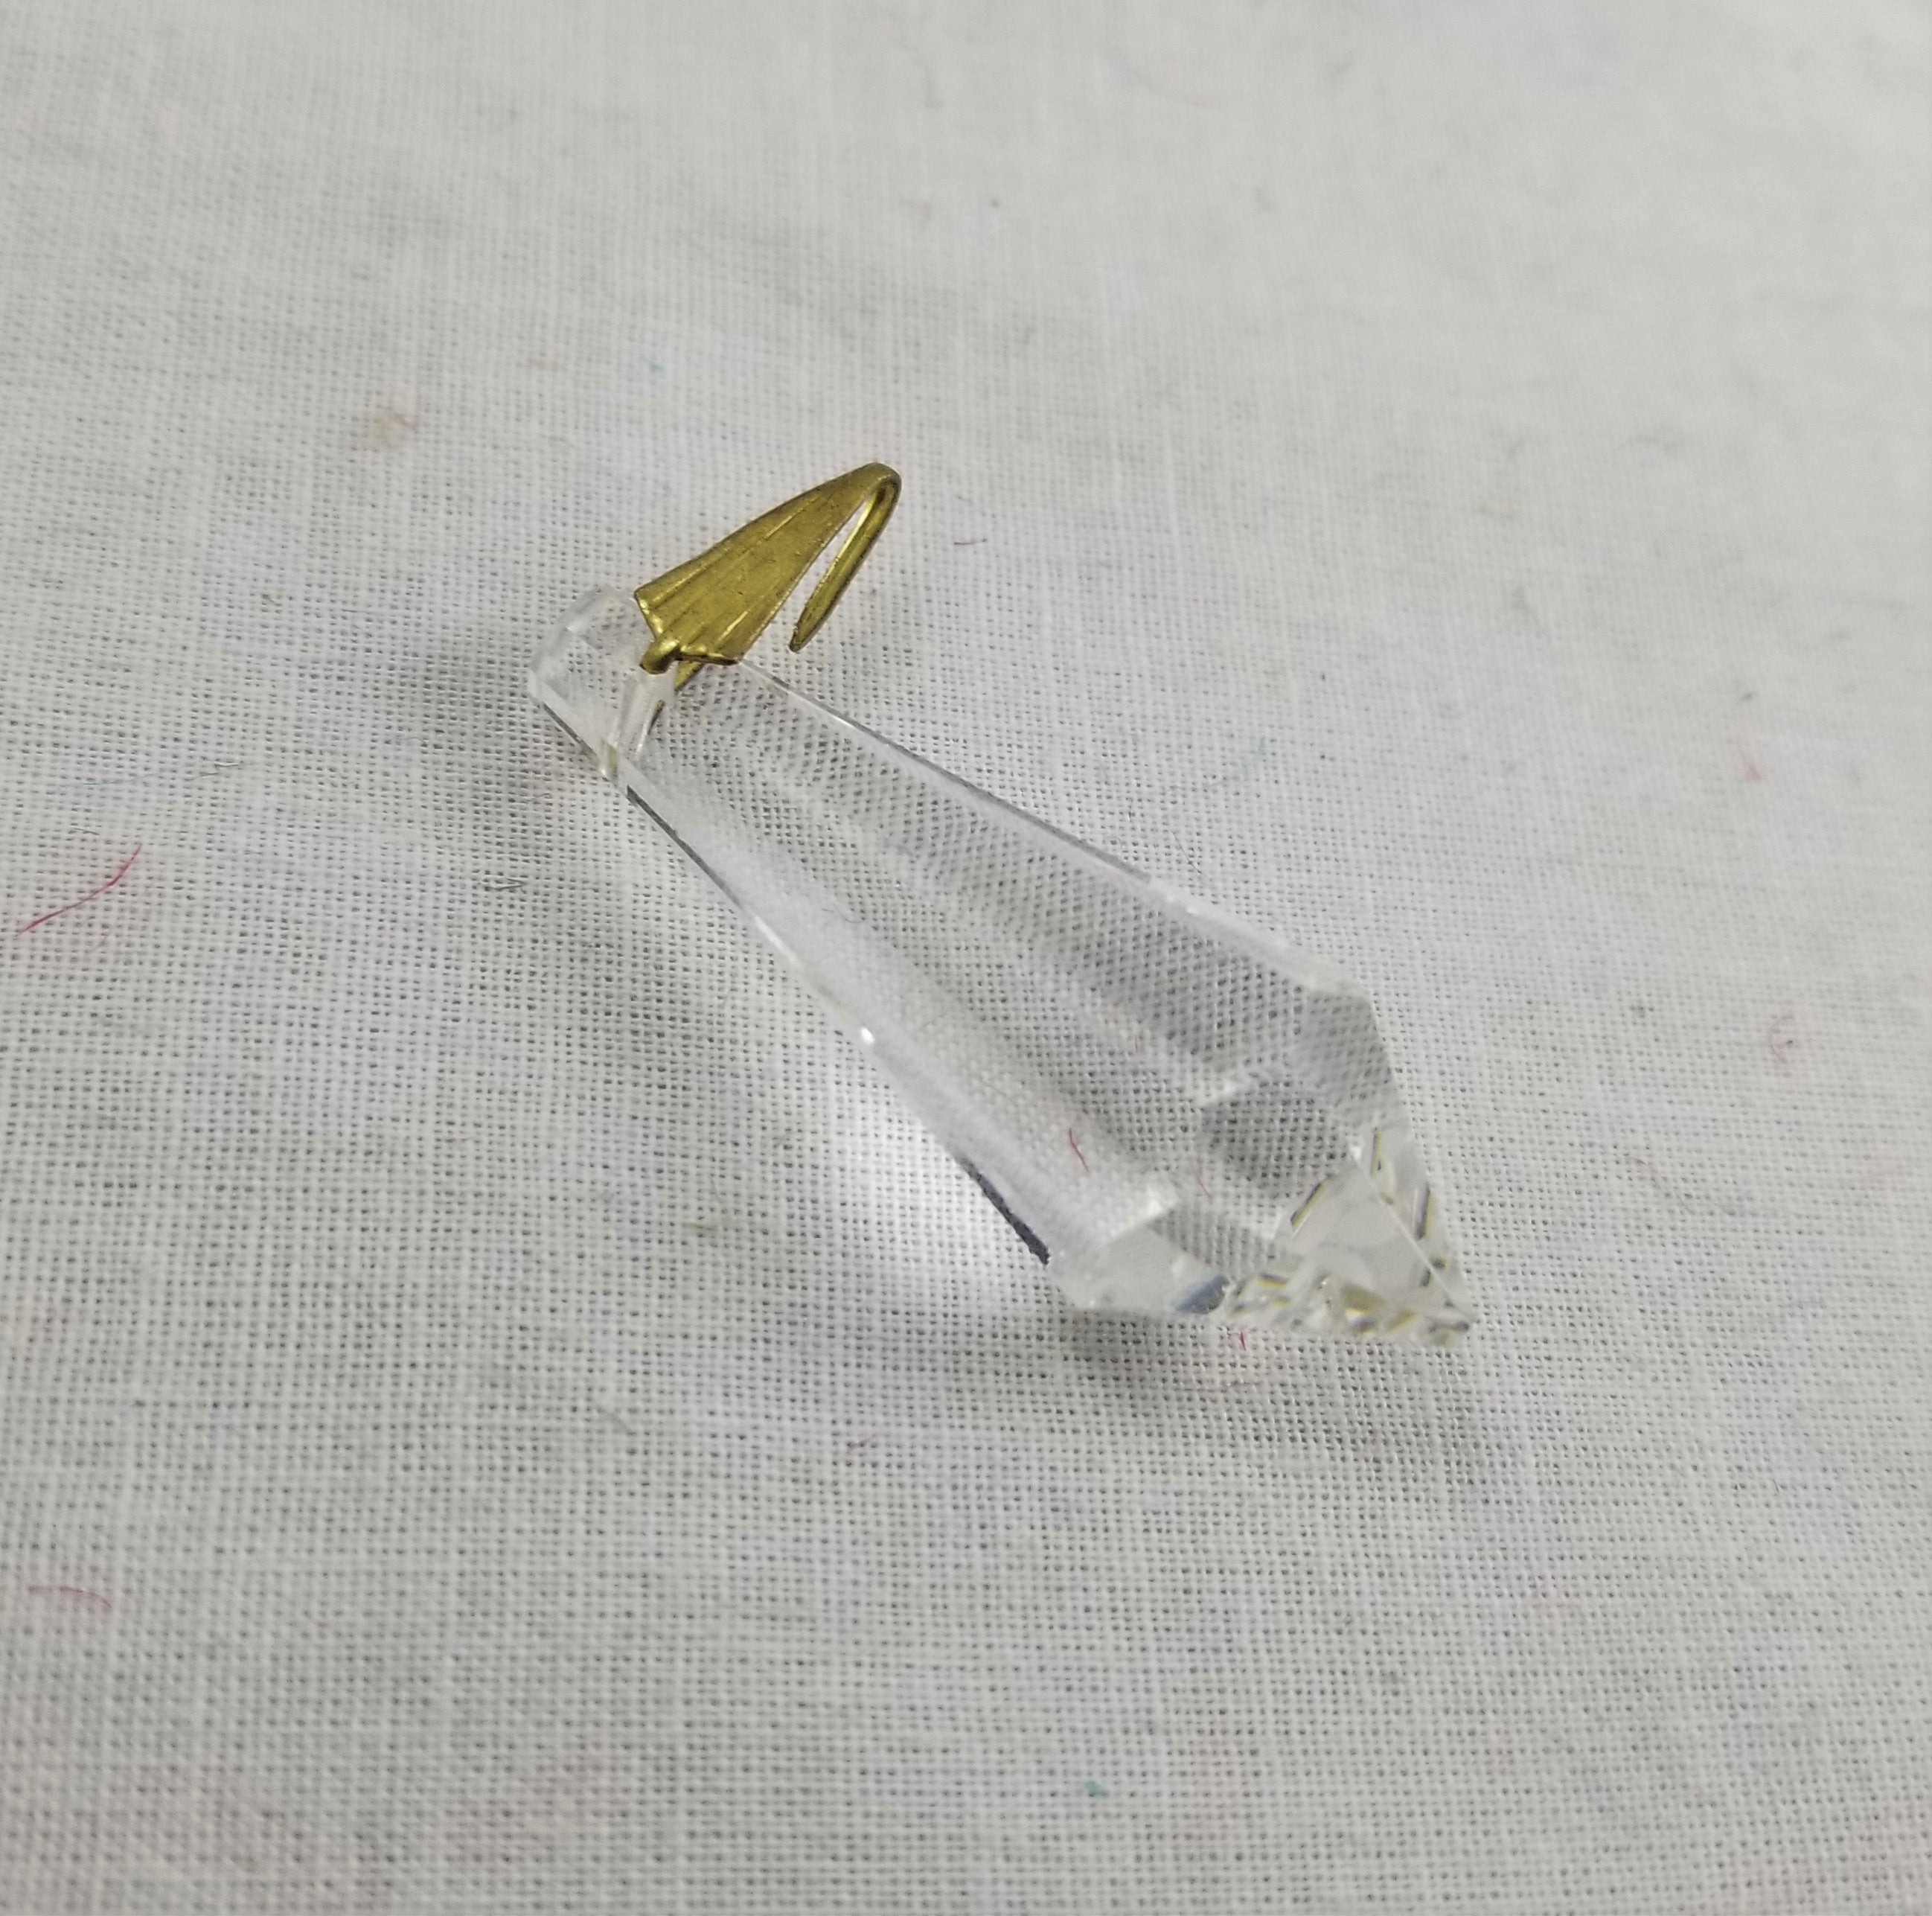 Prism Pinned Crystal Approximately 2 inches length